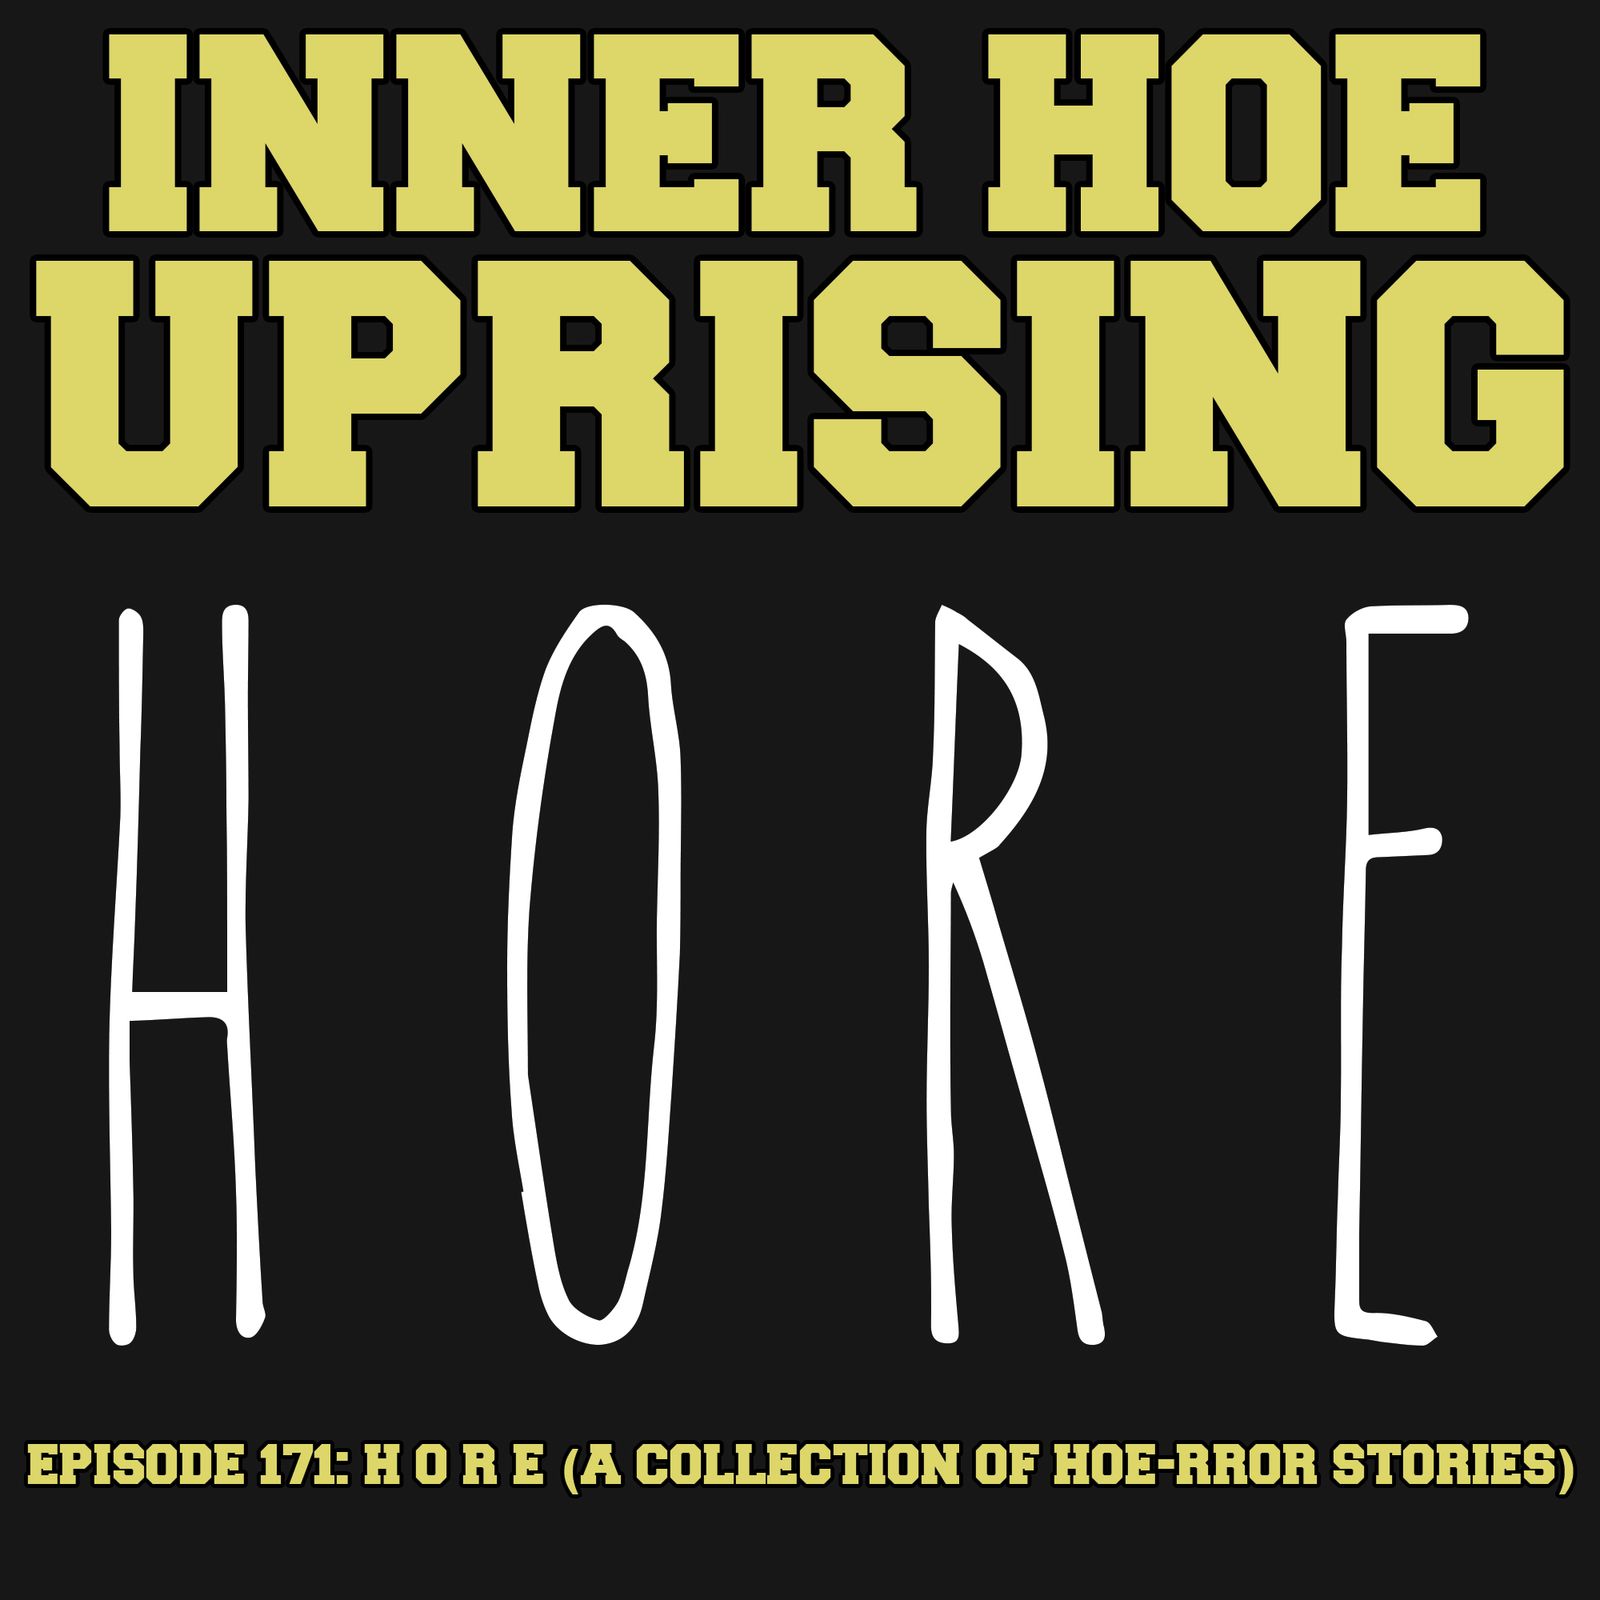 S5 Ep50: H O R E (A collection of hoe-rror stories)